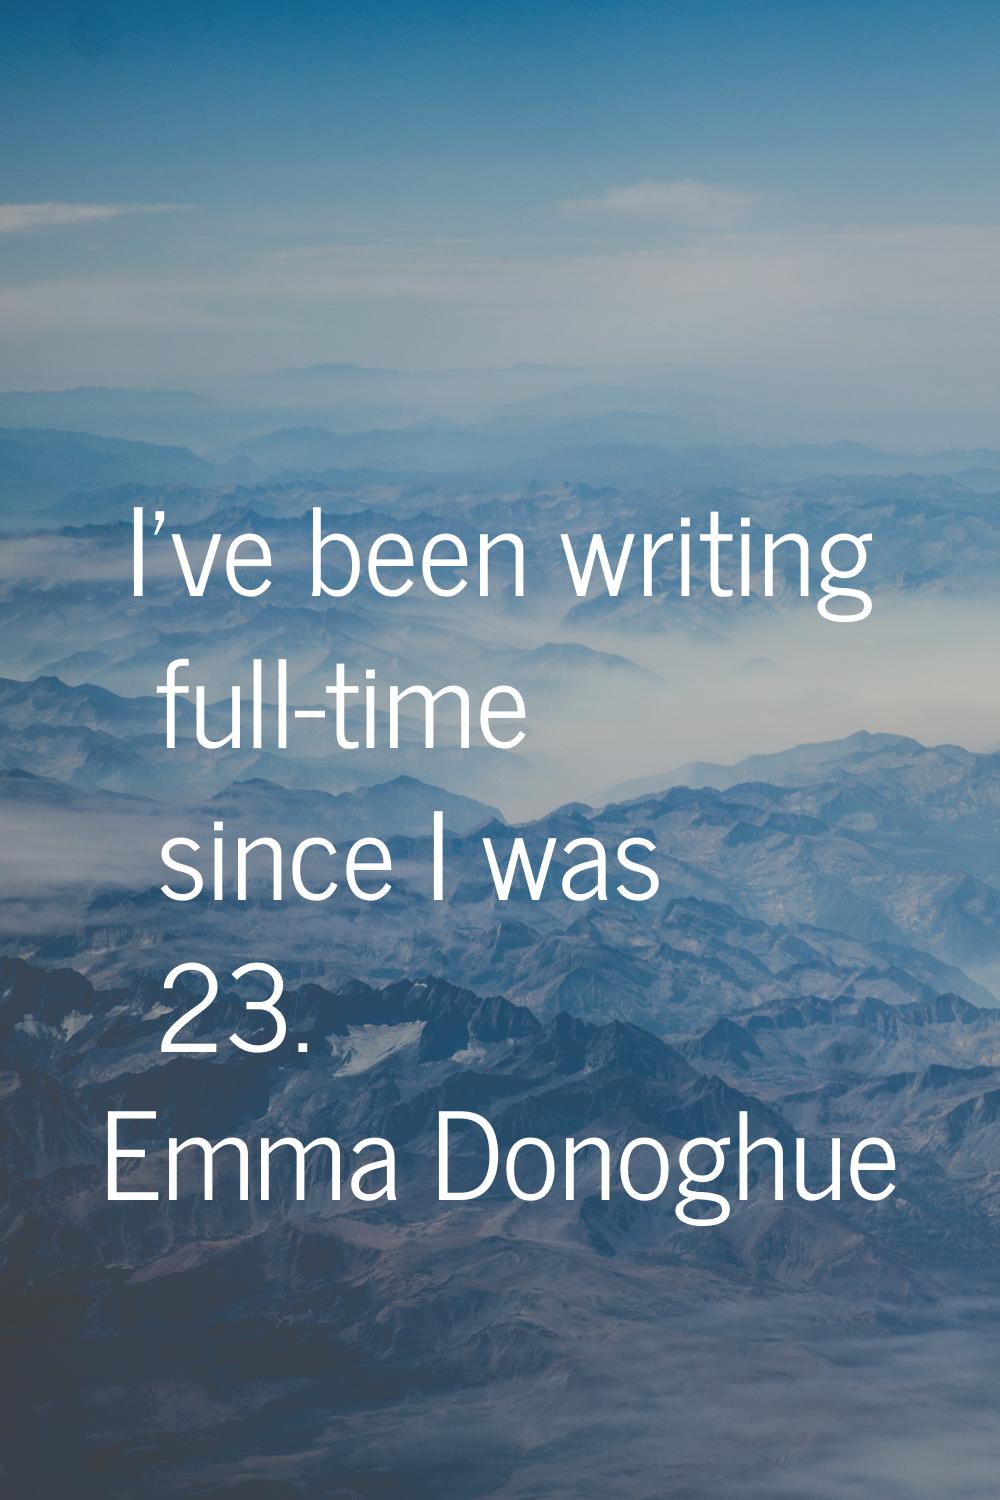 I've been writing full-time since I was 23.